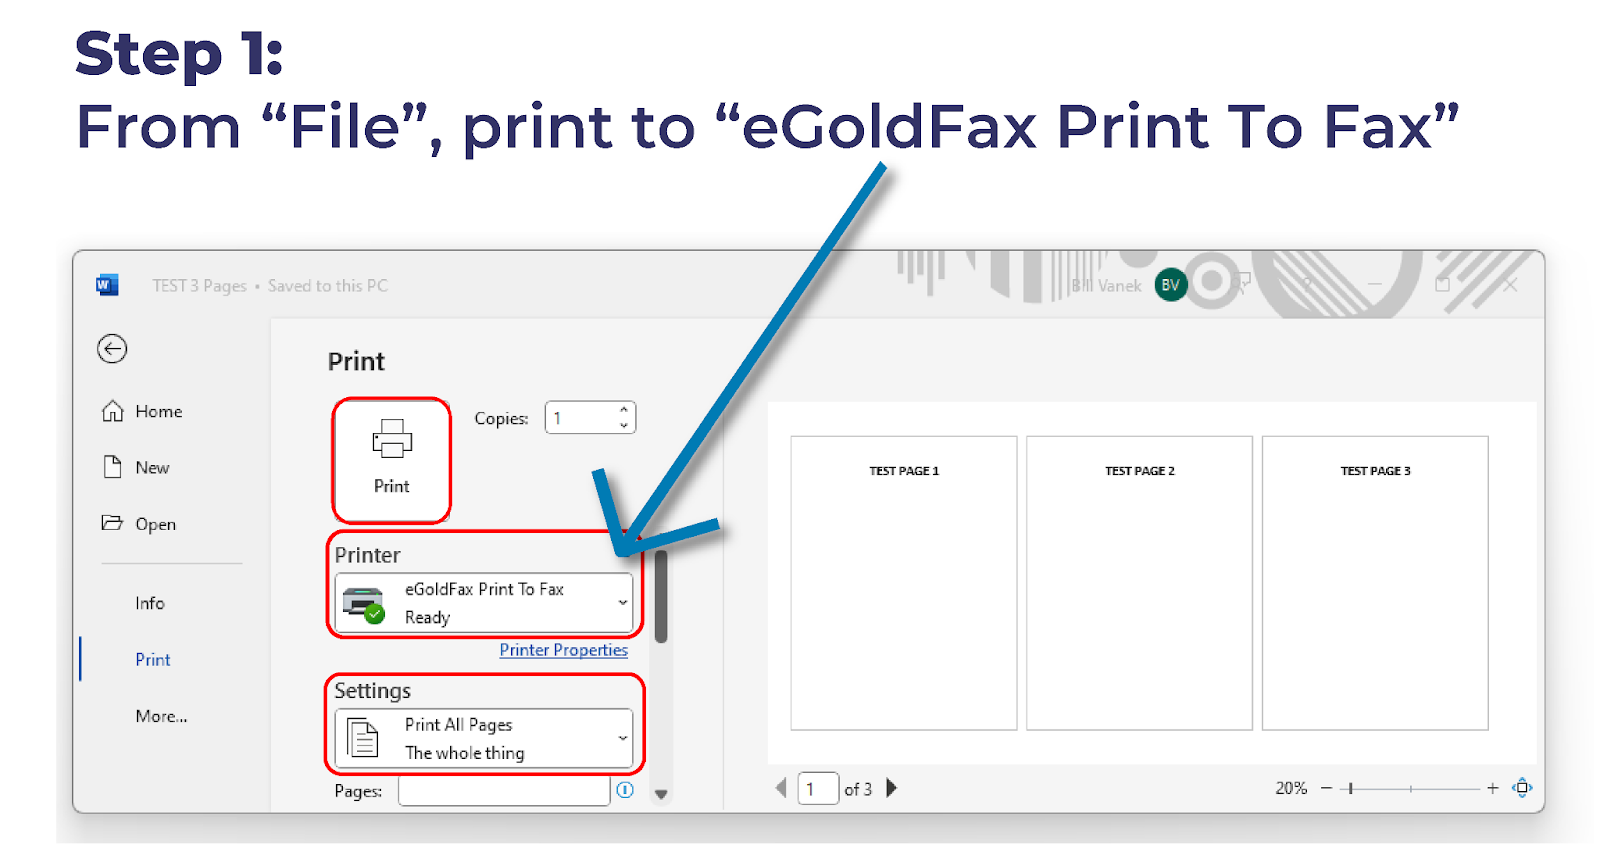 egoldfax instructions for print to fax